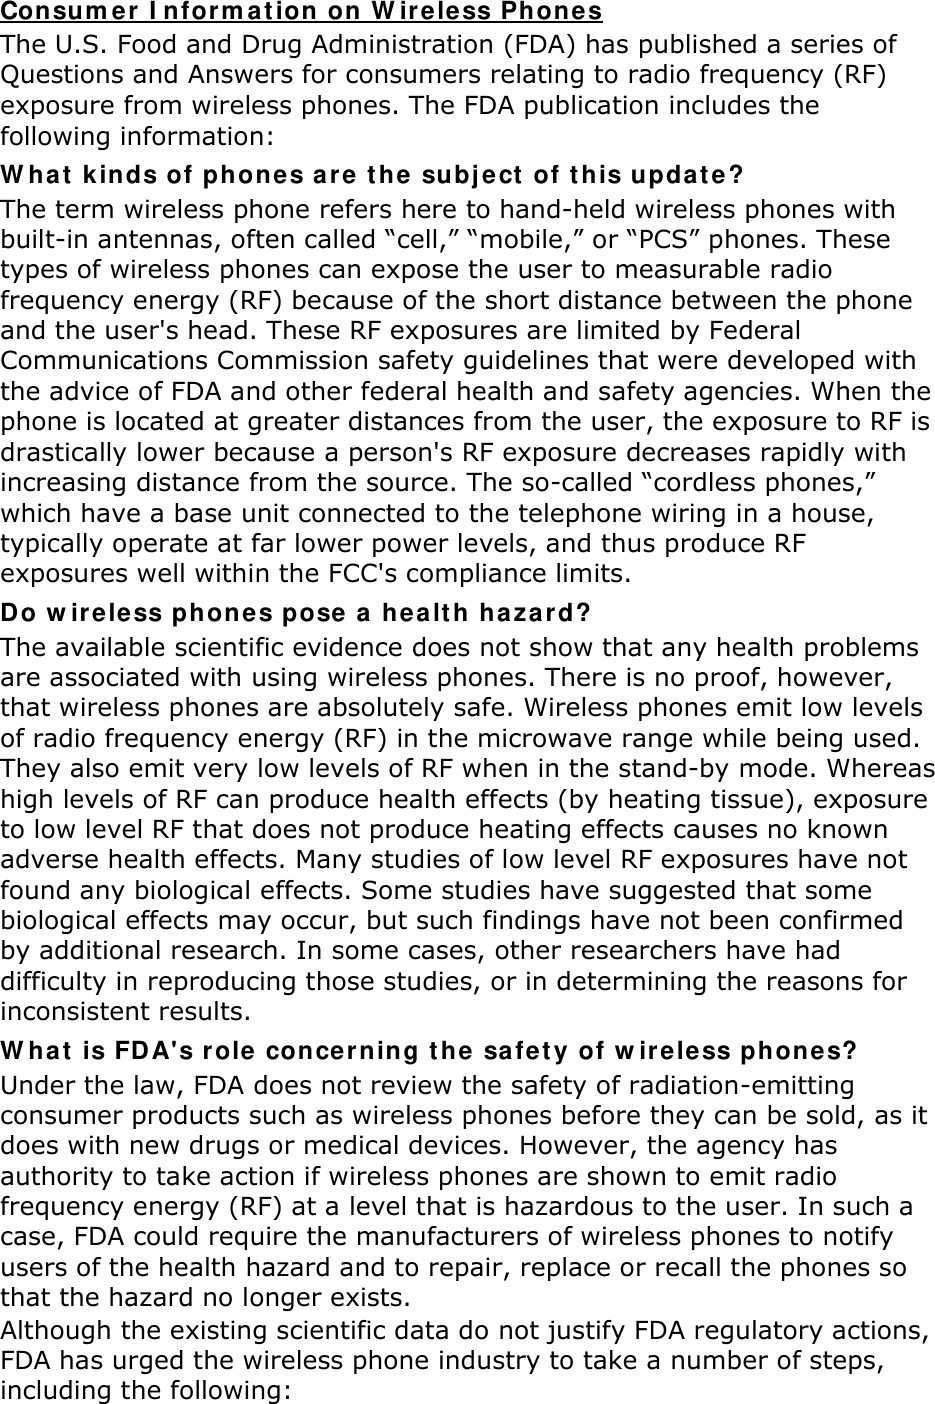 The U.S. Food and Drug Administration (FDA) has published a series of Questions and Answers for consumers relating to radio frequency (RF) exposure from wireless phones. The FDA publication includes the following information: Consumer Information on Wireless Phones What kinds of phones are the subject of this update? The term wireless phone refers here to hand-held wireless phones with built-in antennas, often called “cell,” “mobile,” or “PCS” phones. These types of wireless phones can expose the user to measurable radio frequency energy (RF) because of the short distance between the phone and the user&apos;s head. These RF exposures are limited by Federal Communications Commission safety guidelines that were developed with the advice of FDA and other federal health and safety agencies. When the phone is located at greater distances from the user, the exposure to RF is drastically lower because a person&apos;s RF exposure decreases rapidly with increasing distance from the source. The so-called “cordless phones,” which have a base unit connected to the telephone wiring in a house, typically operate at far lower power levels, and thus produce RF exposures well within the FCC&apos;s compliance limits. Do wireless phones pose a health hazard? The available scientific evidence does not show that any health problems are associated with using wireless phones. There is no proof, however, that wireless phones are absolutely safe. Wireless phones emit low levels of radio frequency energy (RF) in the microwave range while being used. They also emit very low levels of RF when in the stand-by mode. Whereas high levels of RF can produce health effects (by heating tissue), exposure to low level RF that does not produce heating effects causes no known adverse health effects. Many studies of low level RF exposures have not found any biological effects. Some studies have suggested that some biological effects may occur, but such findings have not been confirmed by additional research. In some cases, other researchers have had difficulty in reproducing those studies, or in determining the reasons for inconsistent results. What is FDA&apos;s role concerning the safety of wireless phones? Under the law, FDA does not review the safety of radiation-emitting consumer products such as wireless phones before they can be sold, as it does with new drugs or medical devices. However, the agency has authority to take action if wireless phones are shown to emit radio frequency energy (RF) at a level that is hazardous to the user. In such a case, FDA could require the manufacturers of wireless phones to notify users of the health hazard and to repair, replace or recall the phones so that the hazard no longer exists. Although the existing scientific data do not justify FDA regulatory actions, FDA has urged the wireless phone industry to take a number of steps, including the following: 